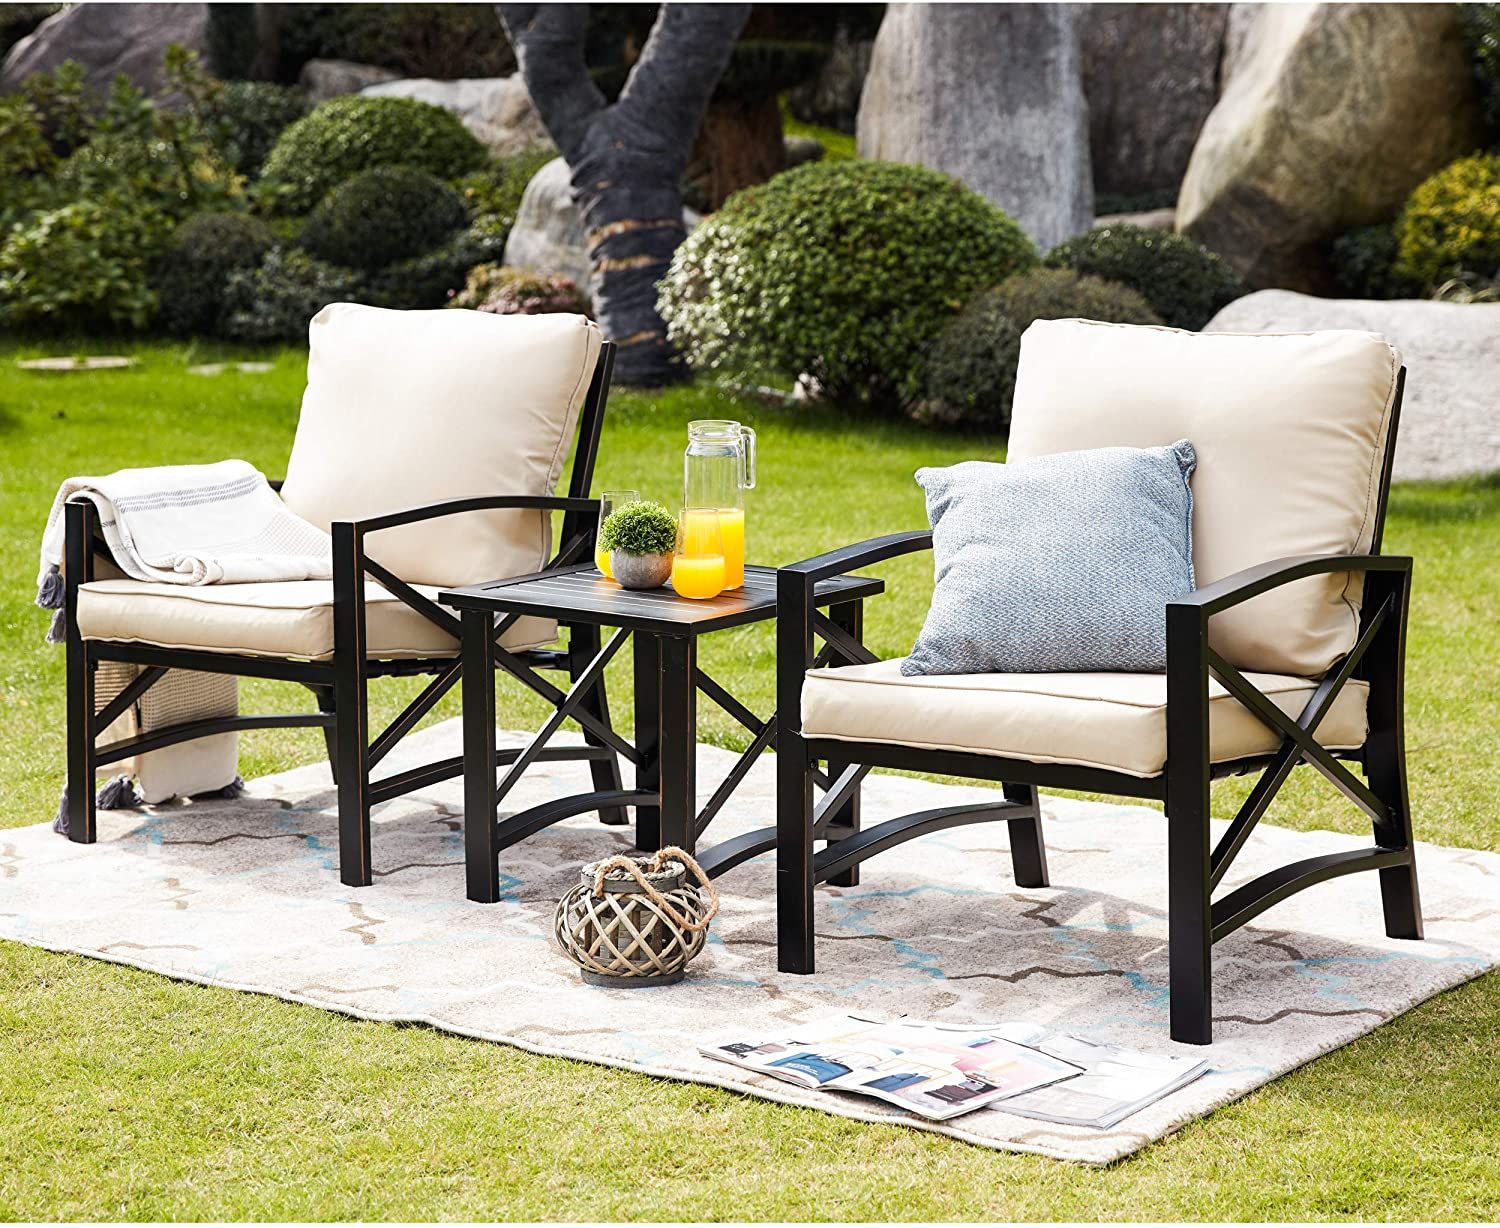 8 Best Patio Furniture Sets 2021 The, Outdoor Furniture Sets With Sunbrella Cushions